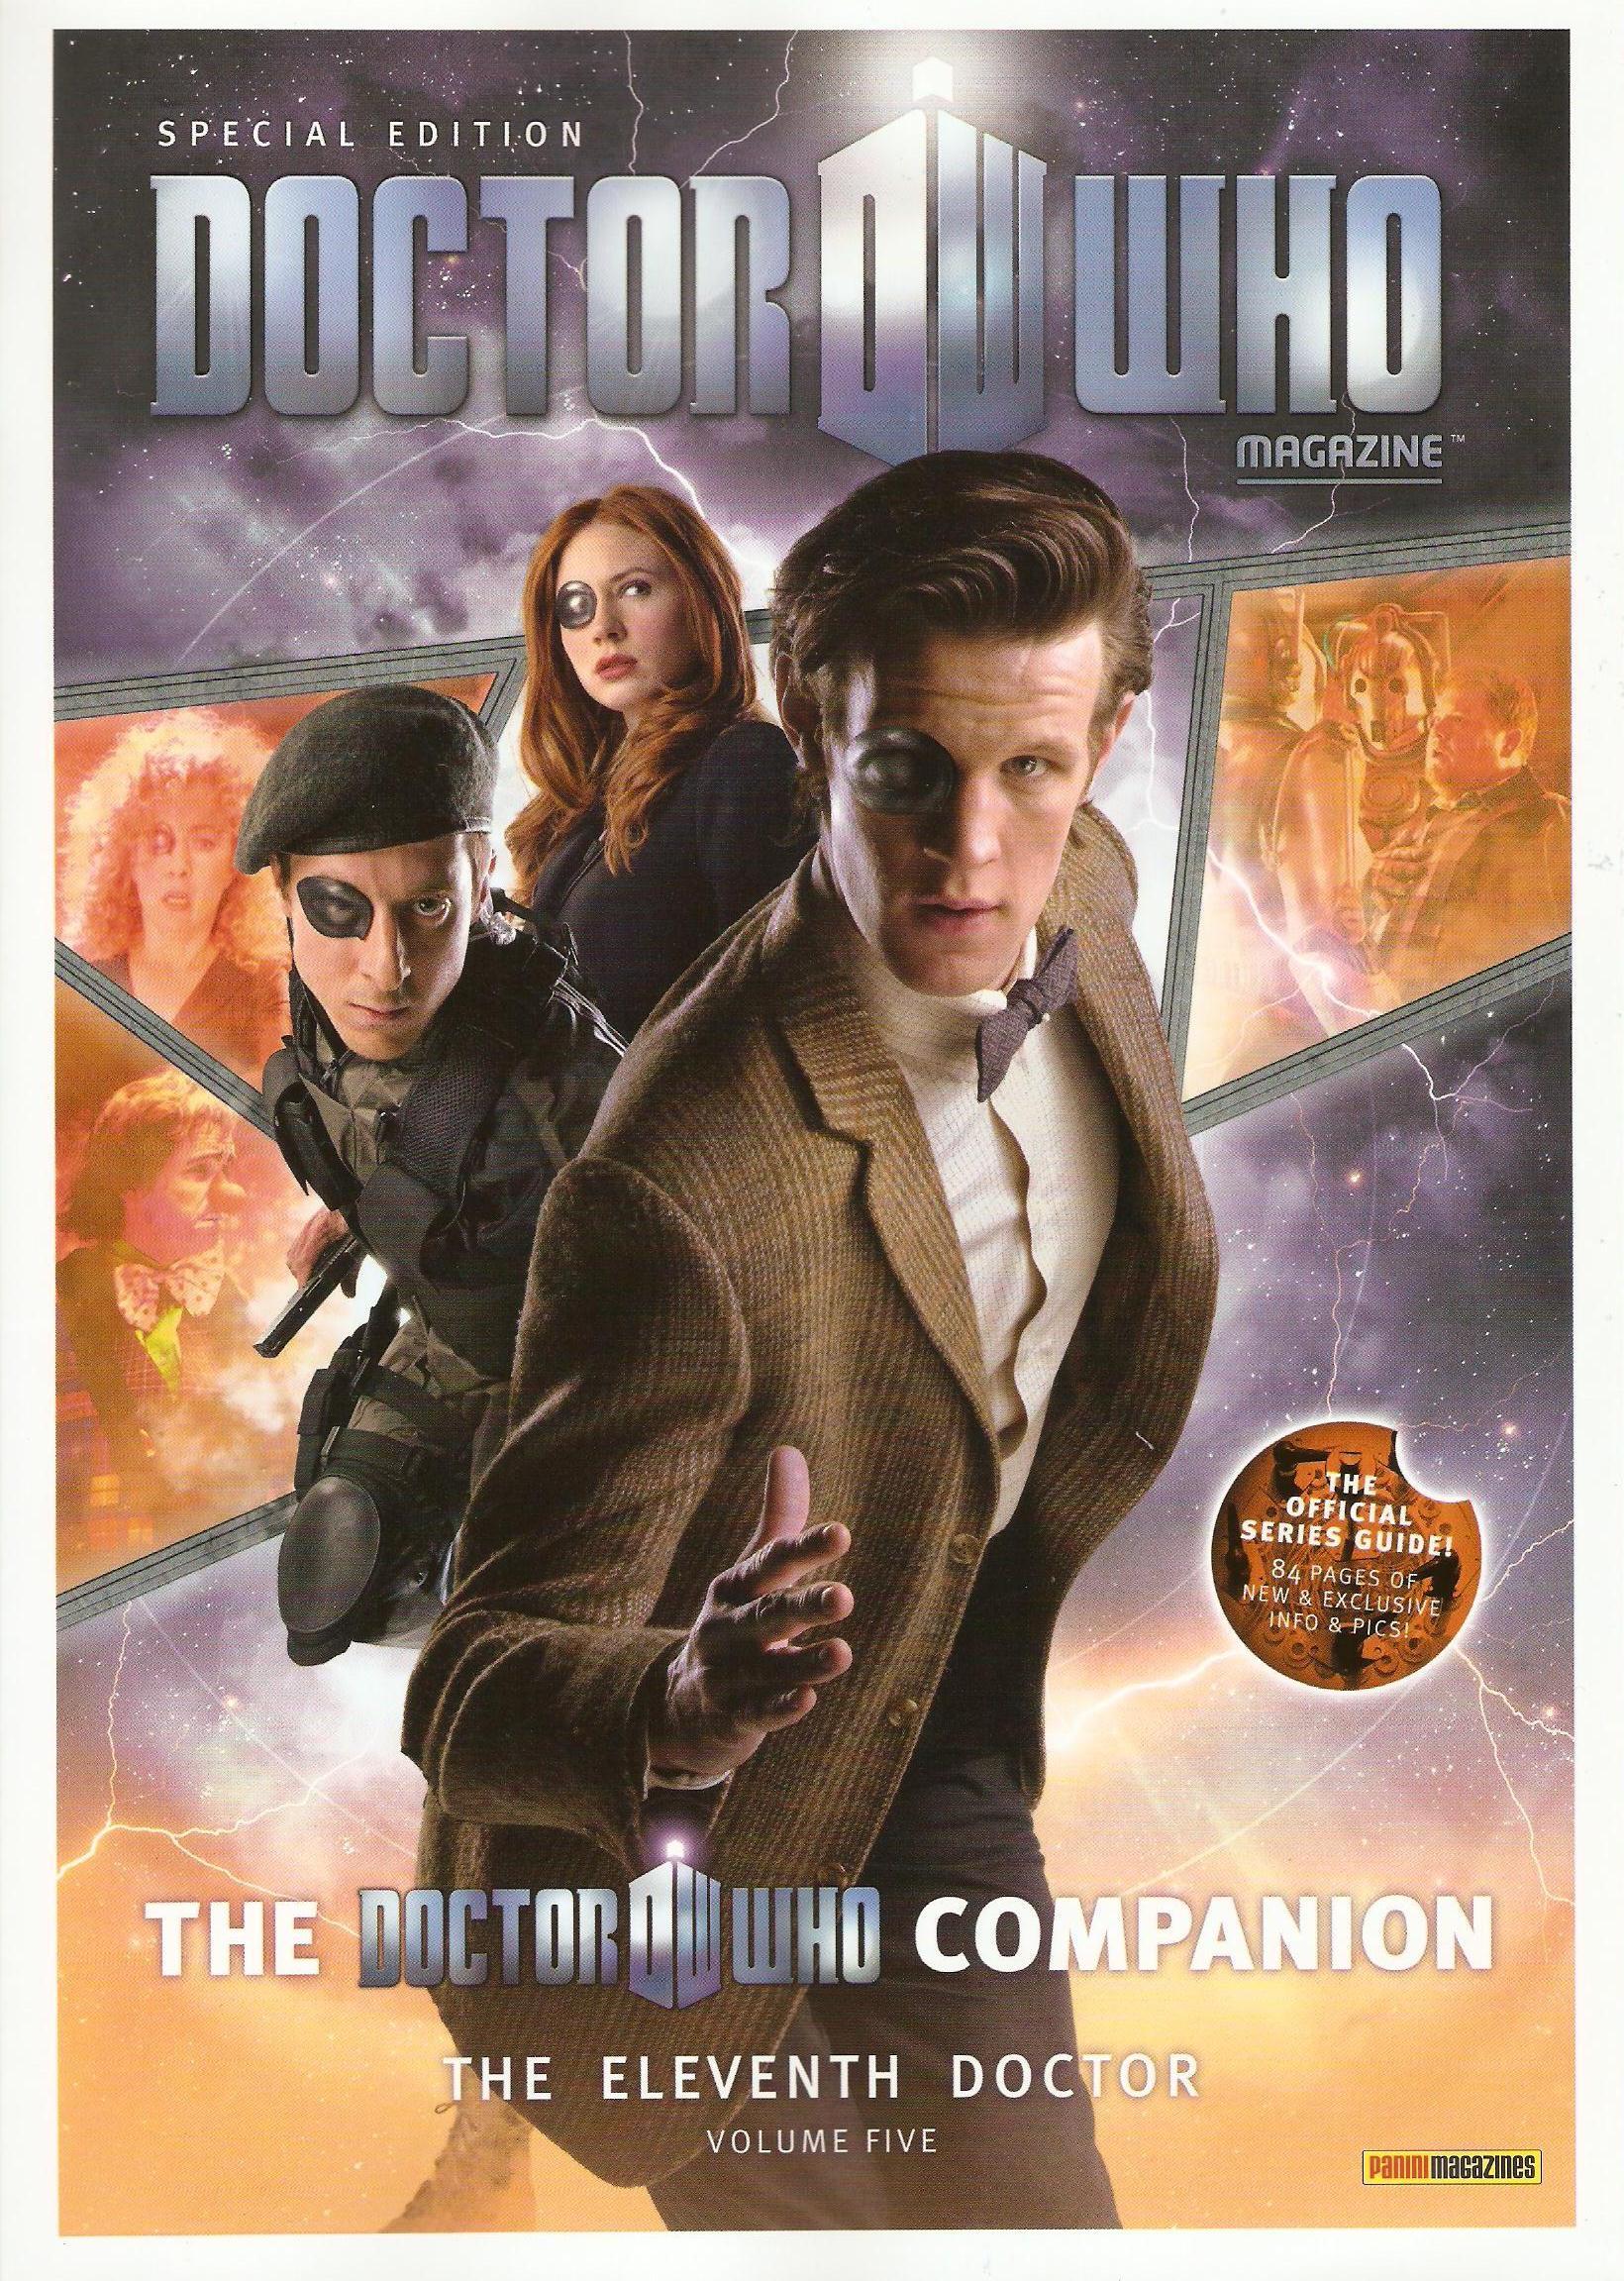 Doctor Who Volume 2 by Tony Lee